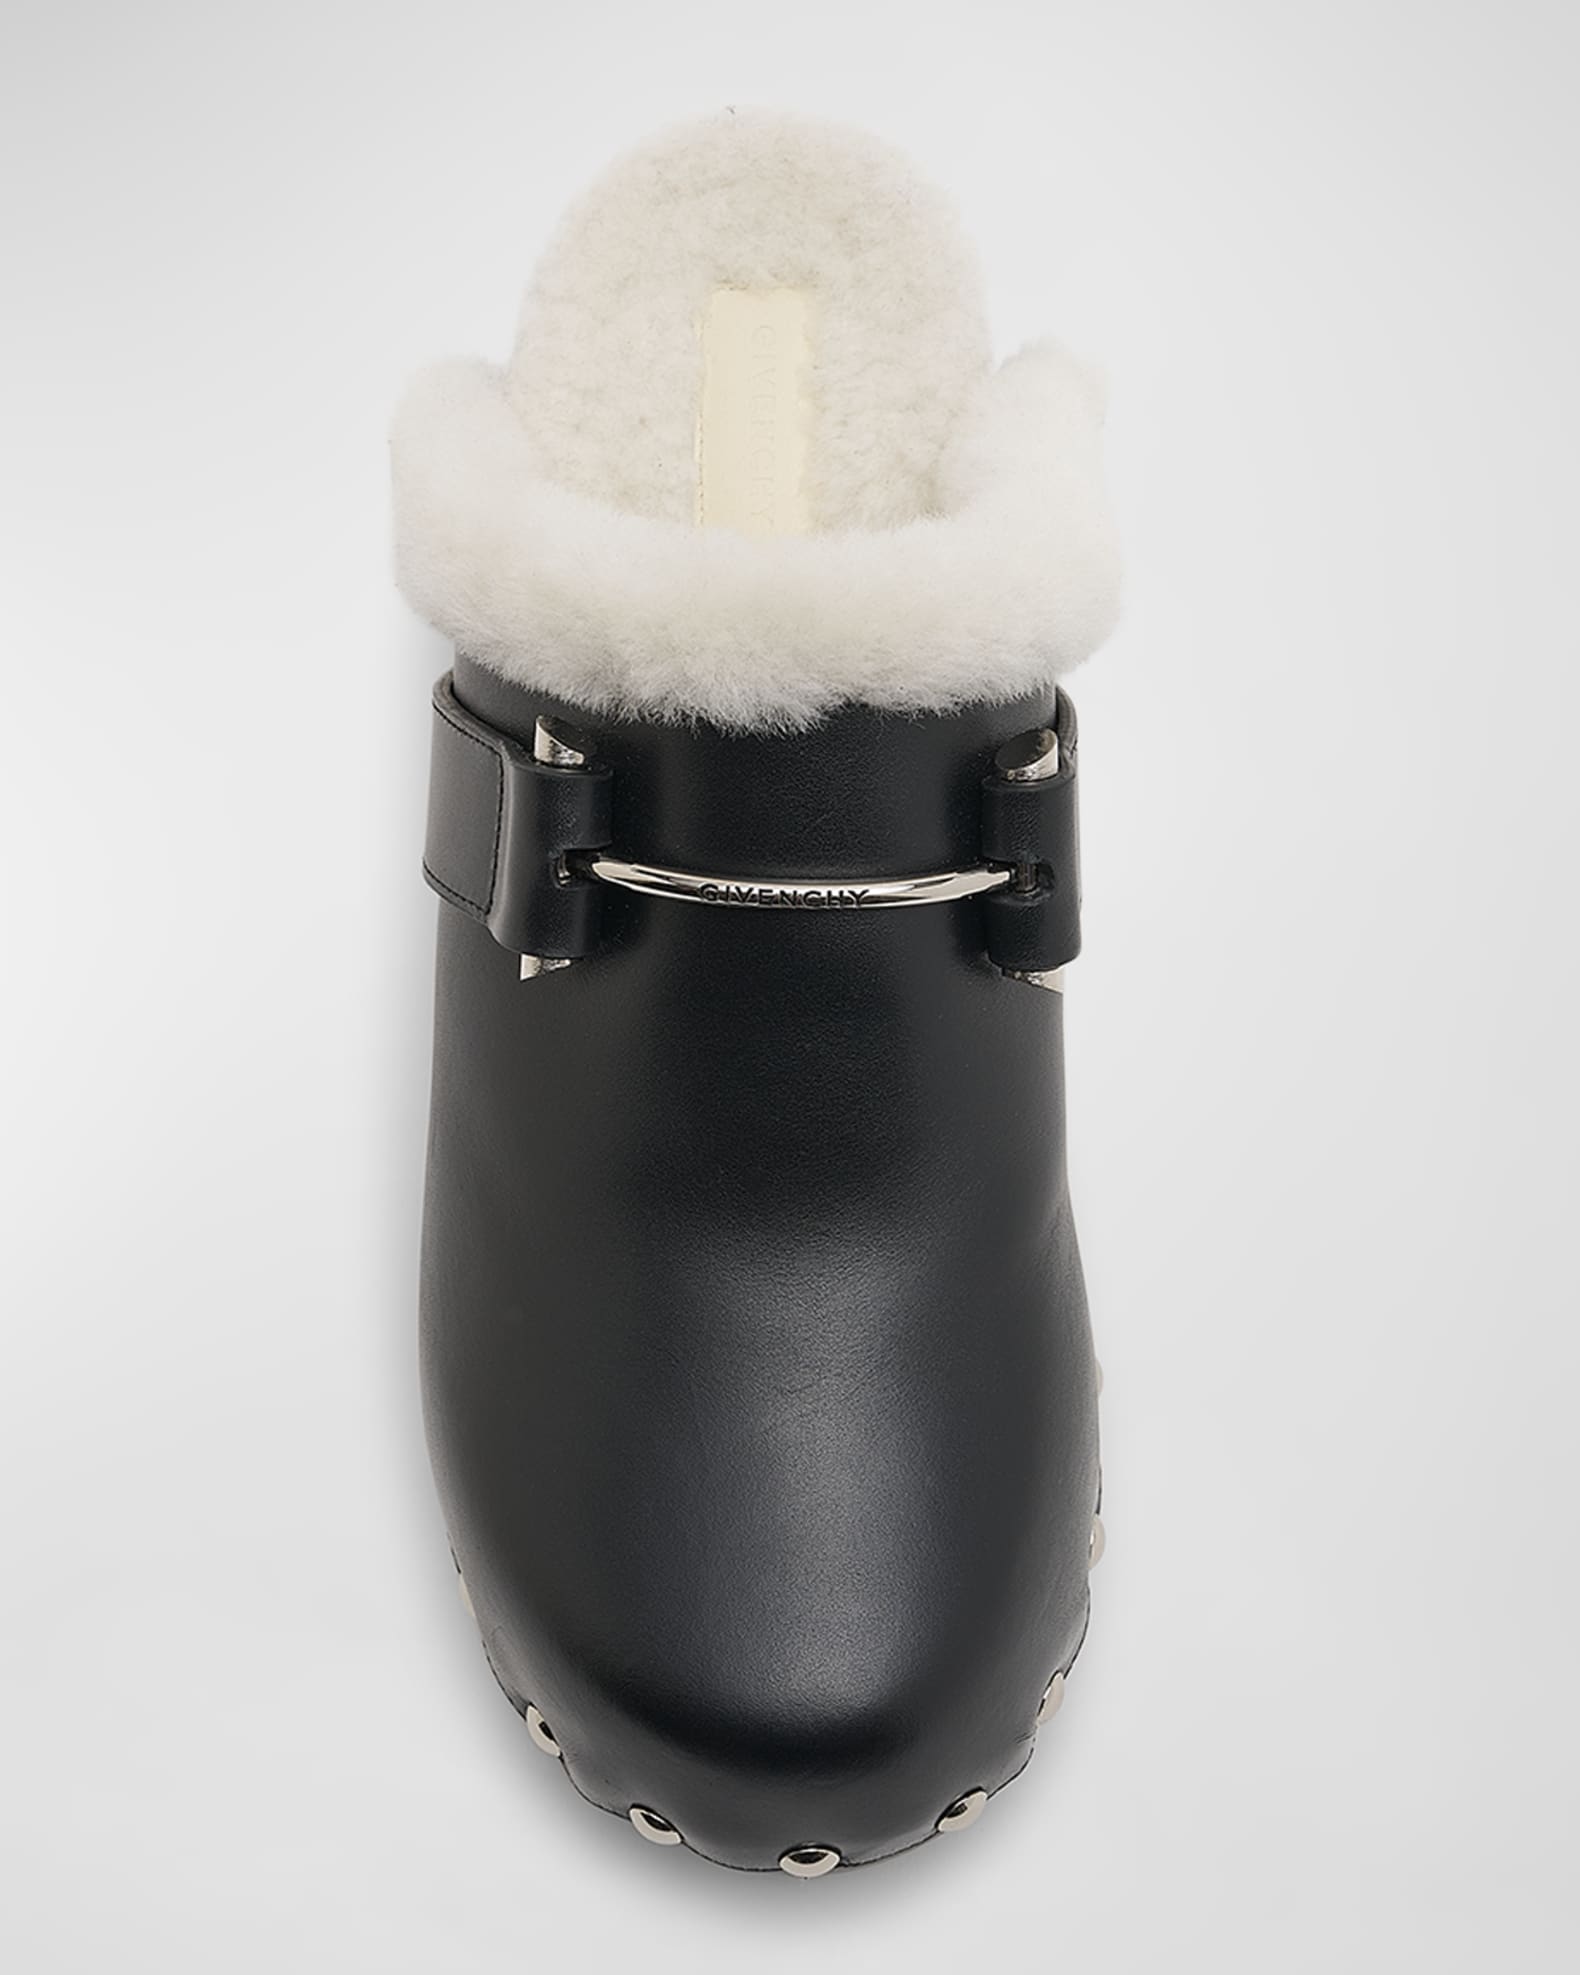 Givenchy G Leather Shearling Slide Clogs | Neiman Marcus